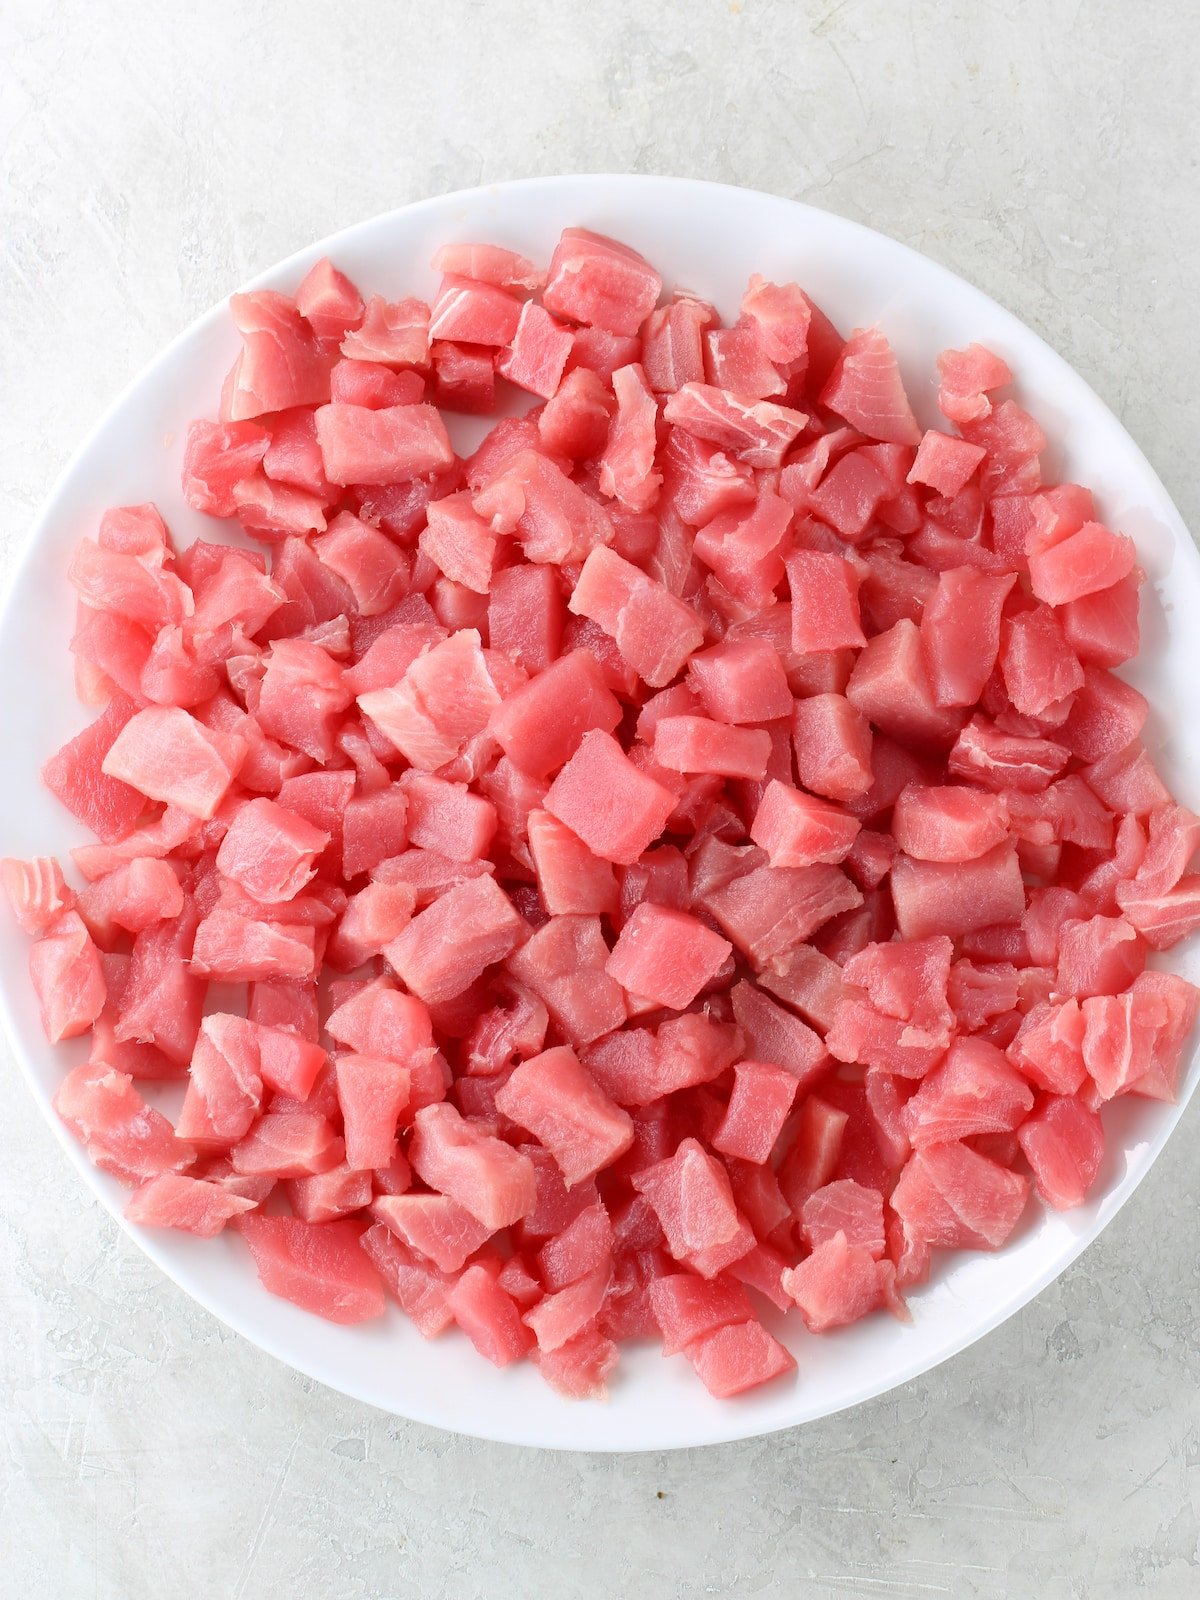 Small cubes of tuna on a plate.